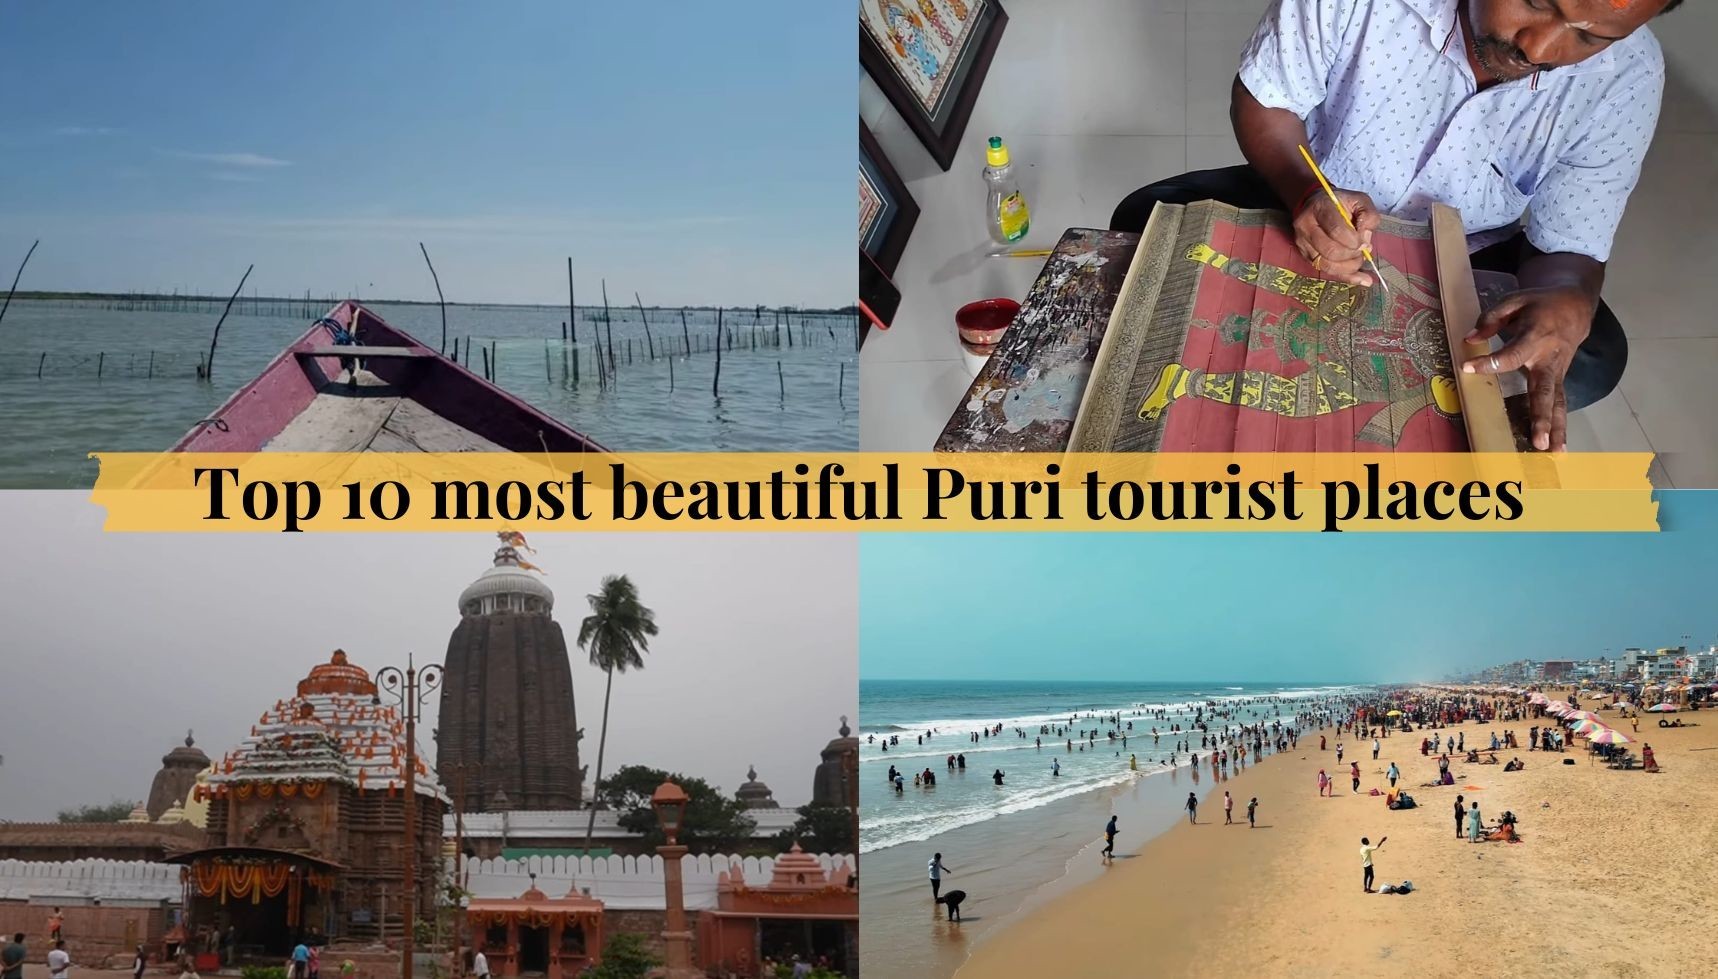 Discover the Top 10 Most Beautiful Puri Tourist Places